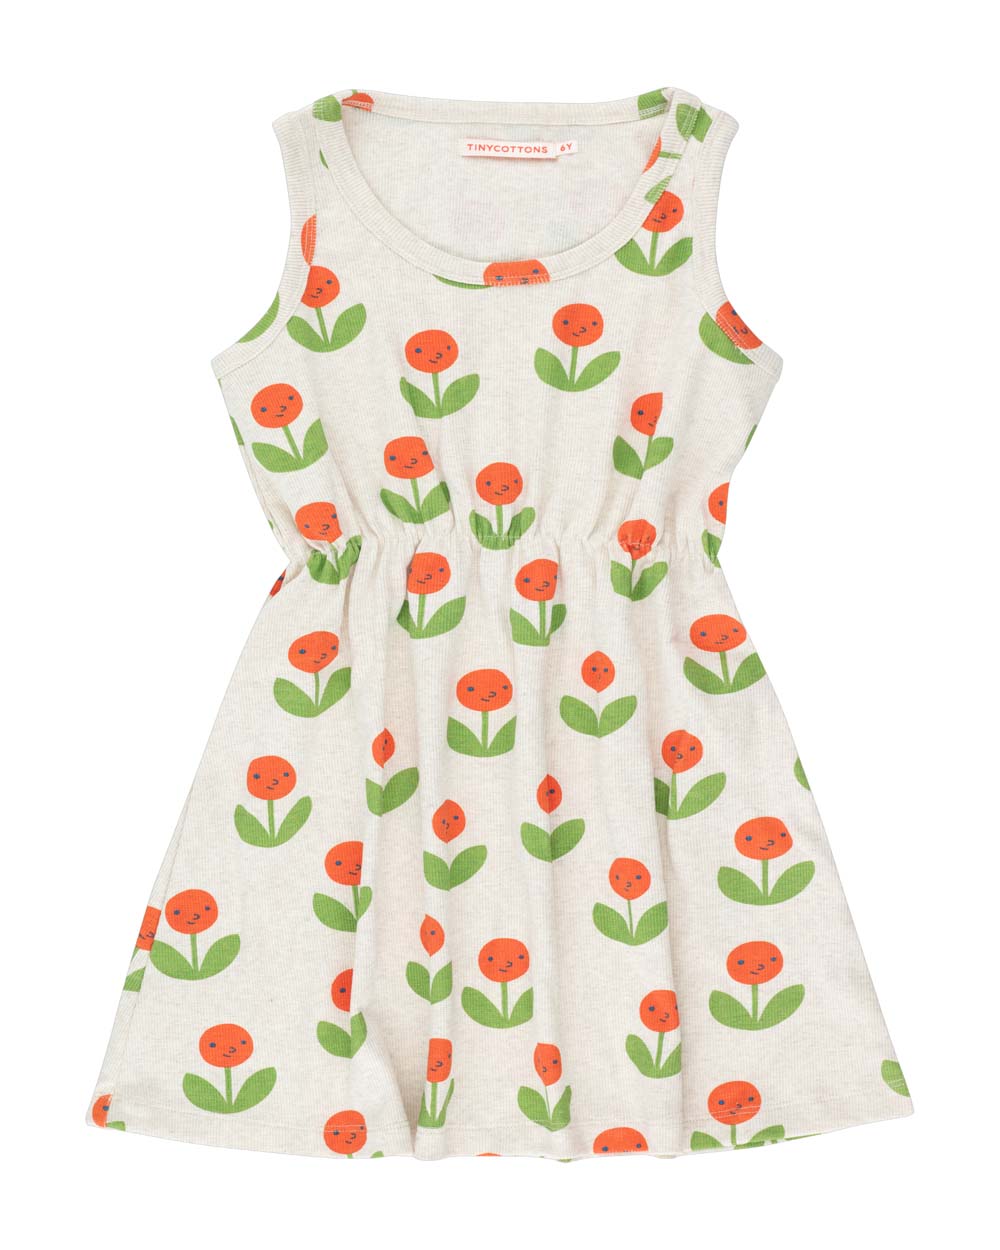 [TINY COTTONS]PEONIES DRESS /light cream heather/summer red [6Y, 10Y]